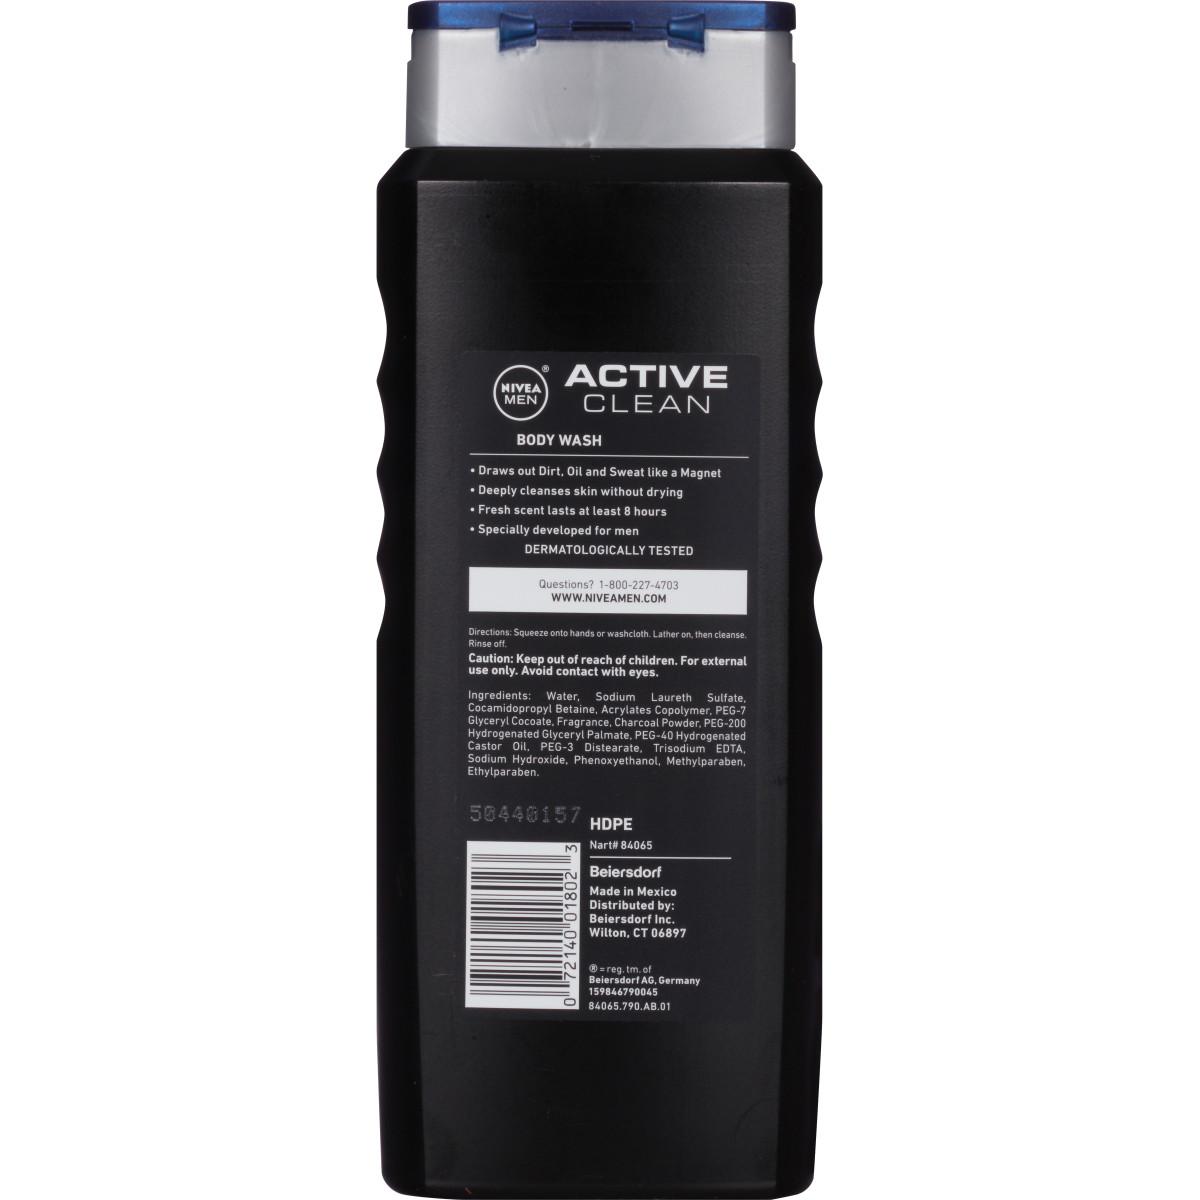 NIVEA Men Active Clean Body Wash with Natural Charcoal; image 3 of 3